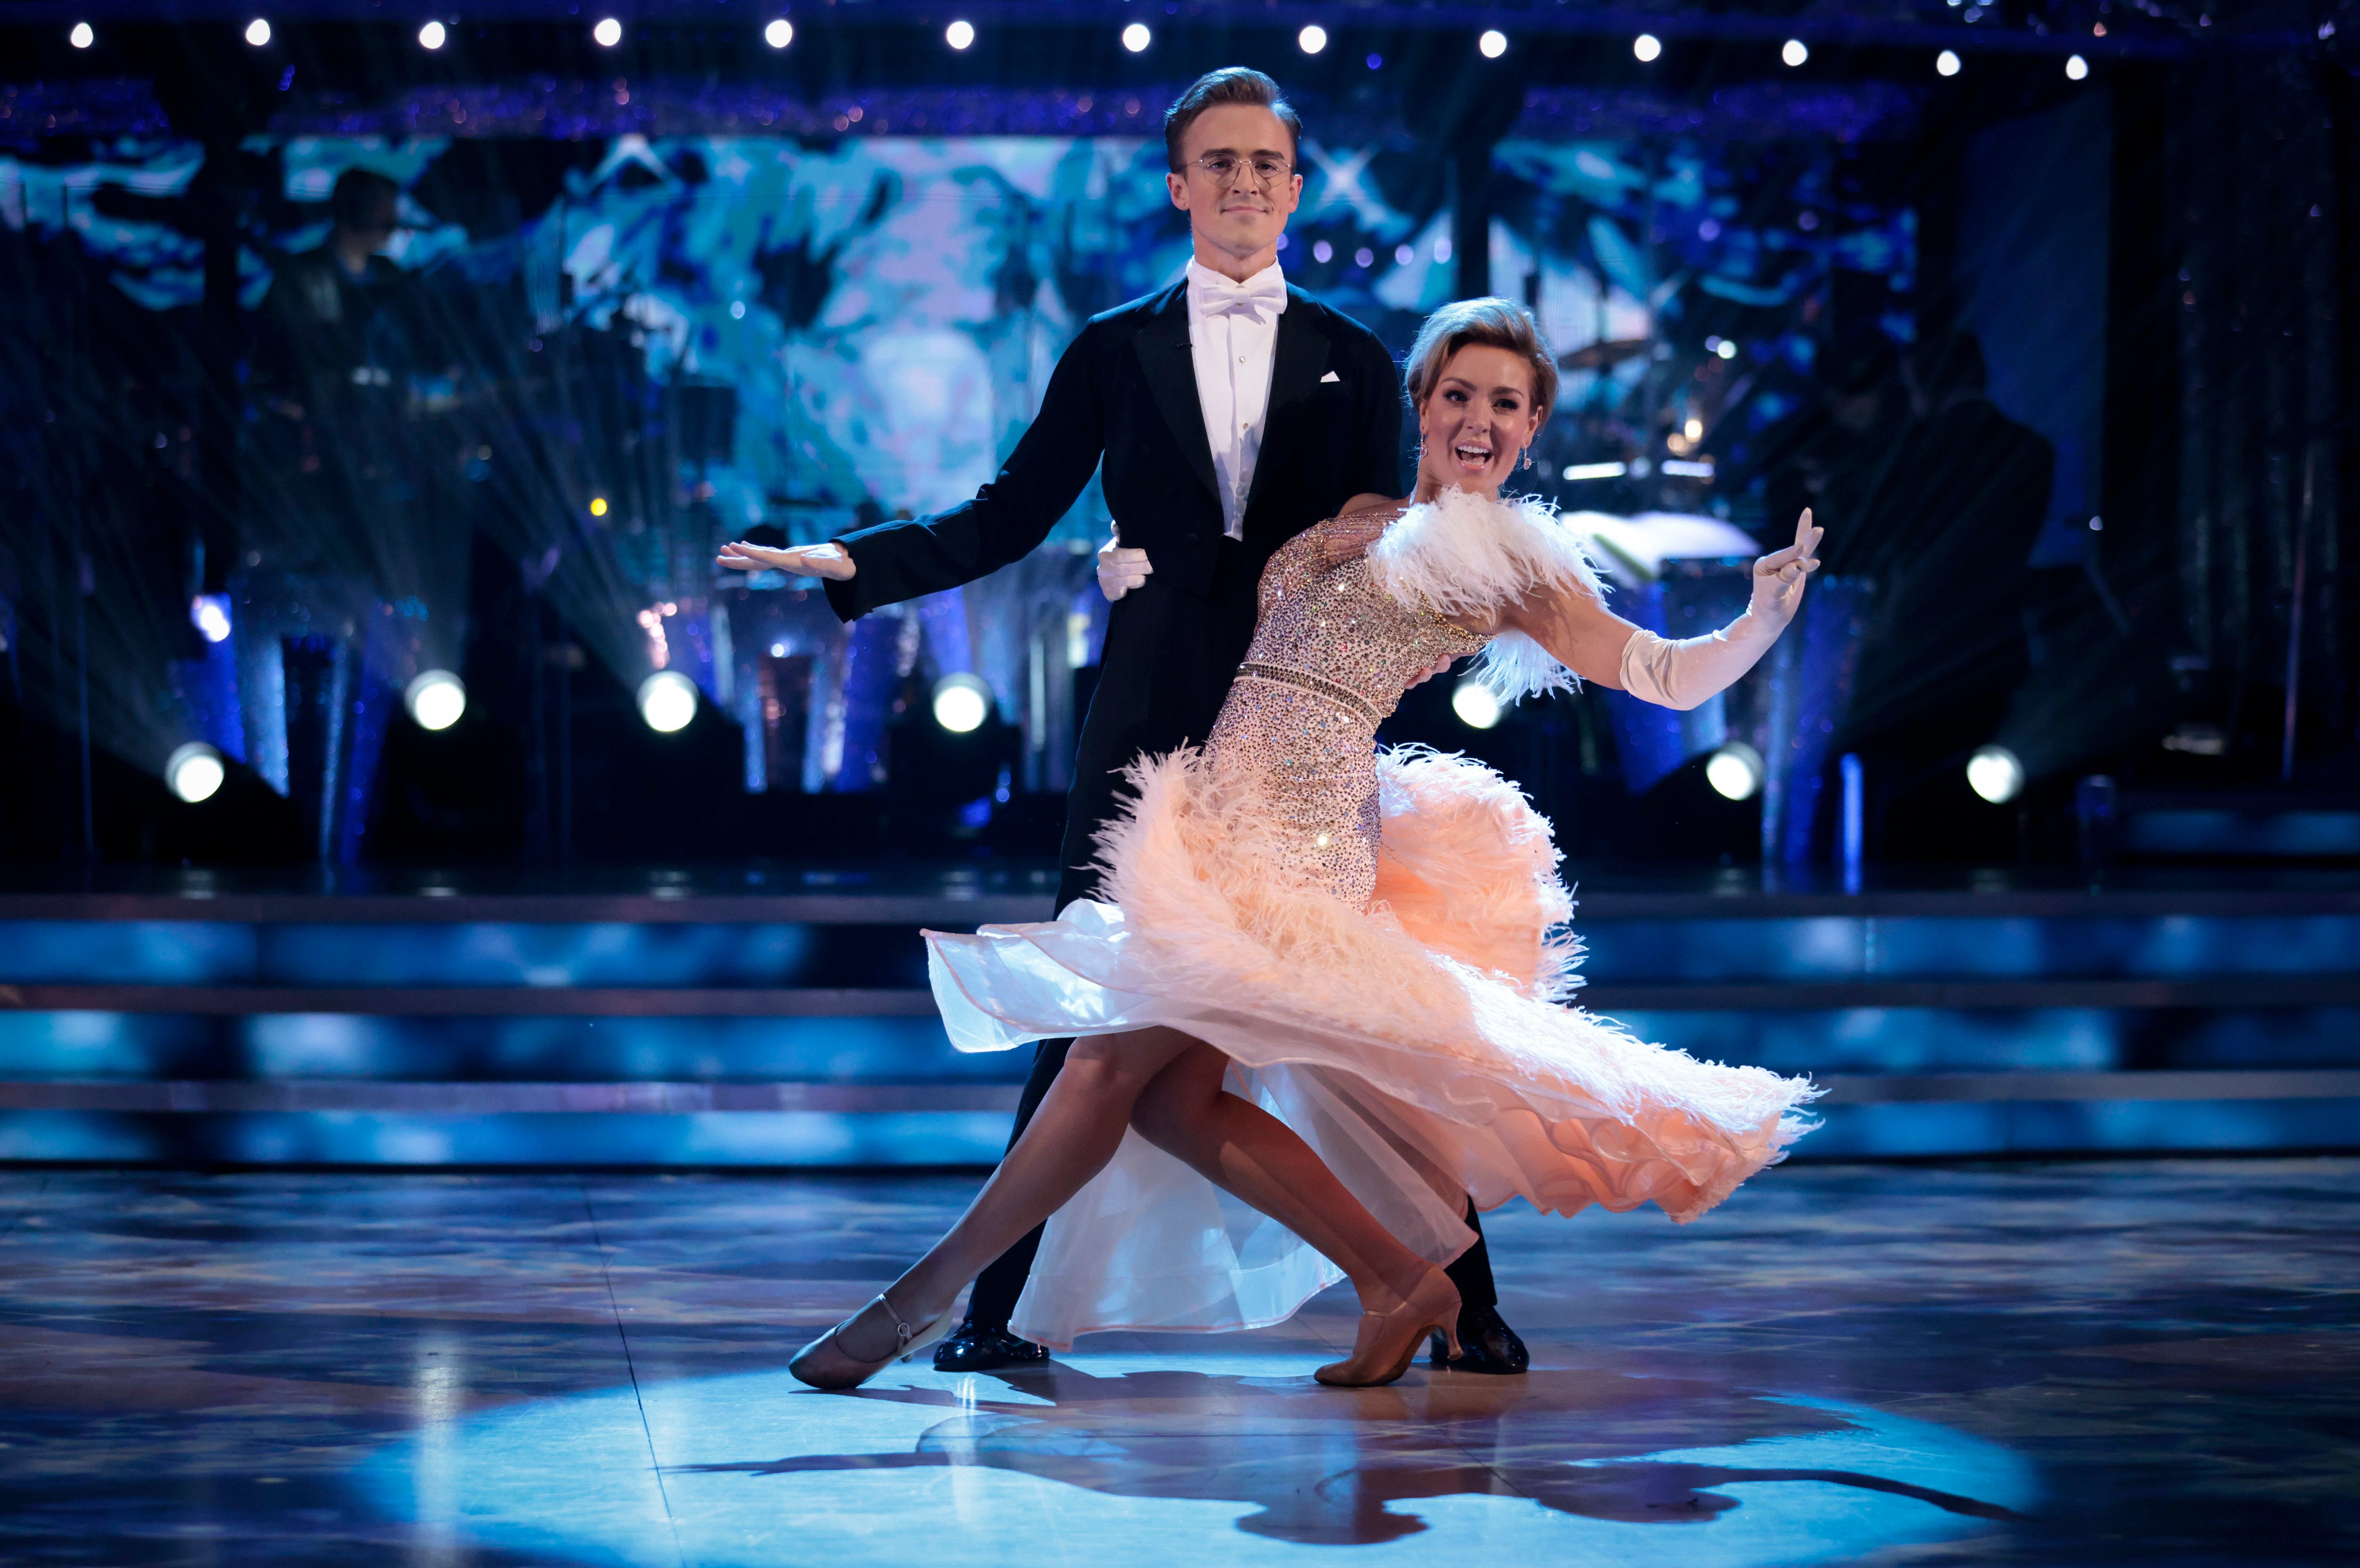 Dowden on ‘Strictly Come Dancing’ in 2021 with McFly’s Tom Fletcher